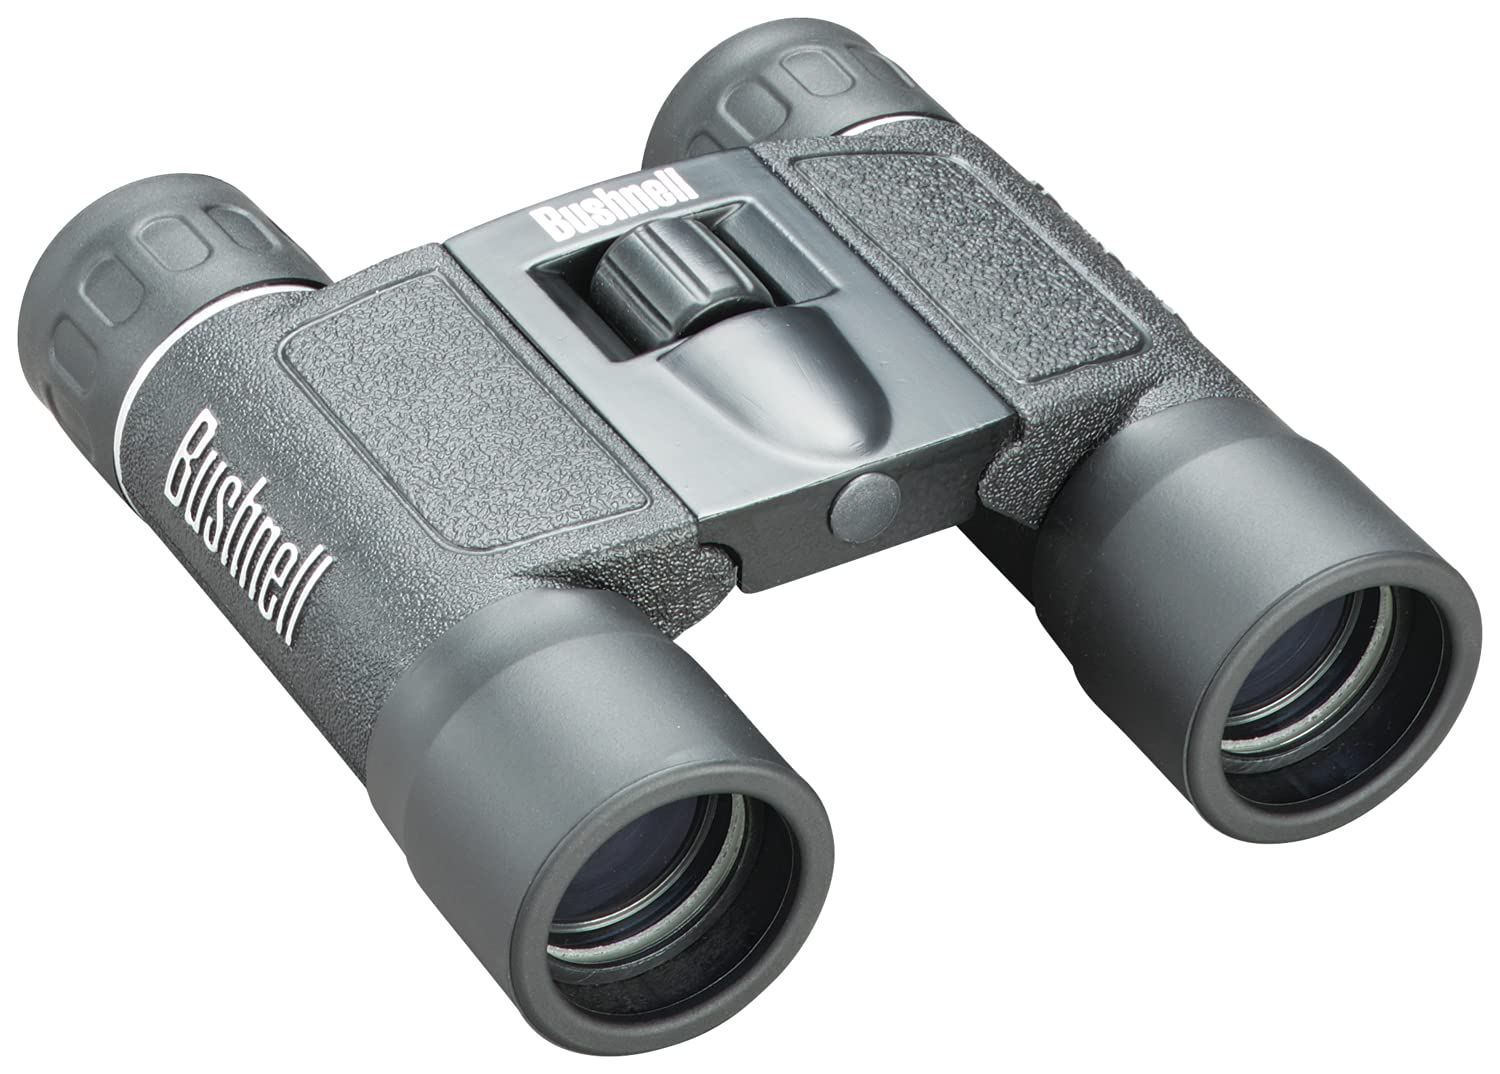 Bushnell Powerview Compact Folding Roof Prism 10x25 Binocular $9.47 + free shipping w/ Prime or on Orders over $35